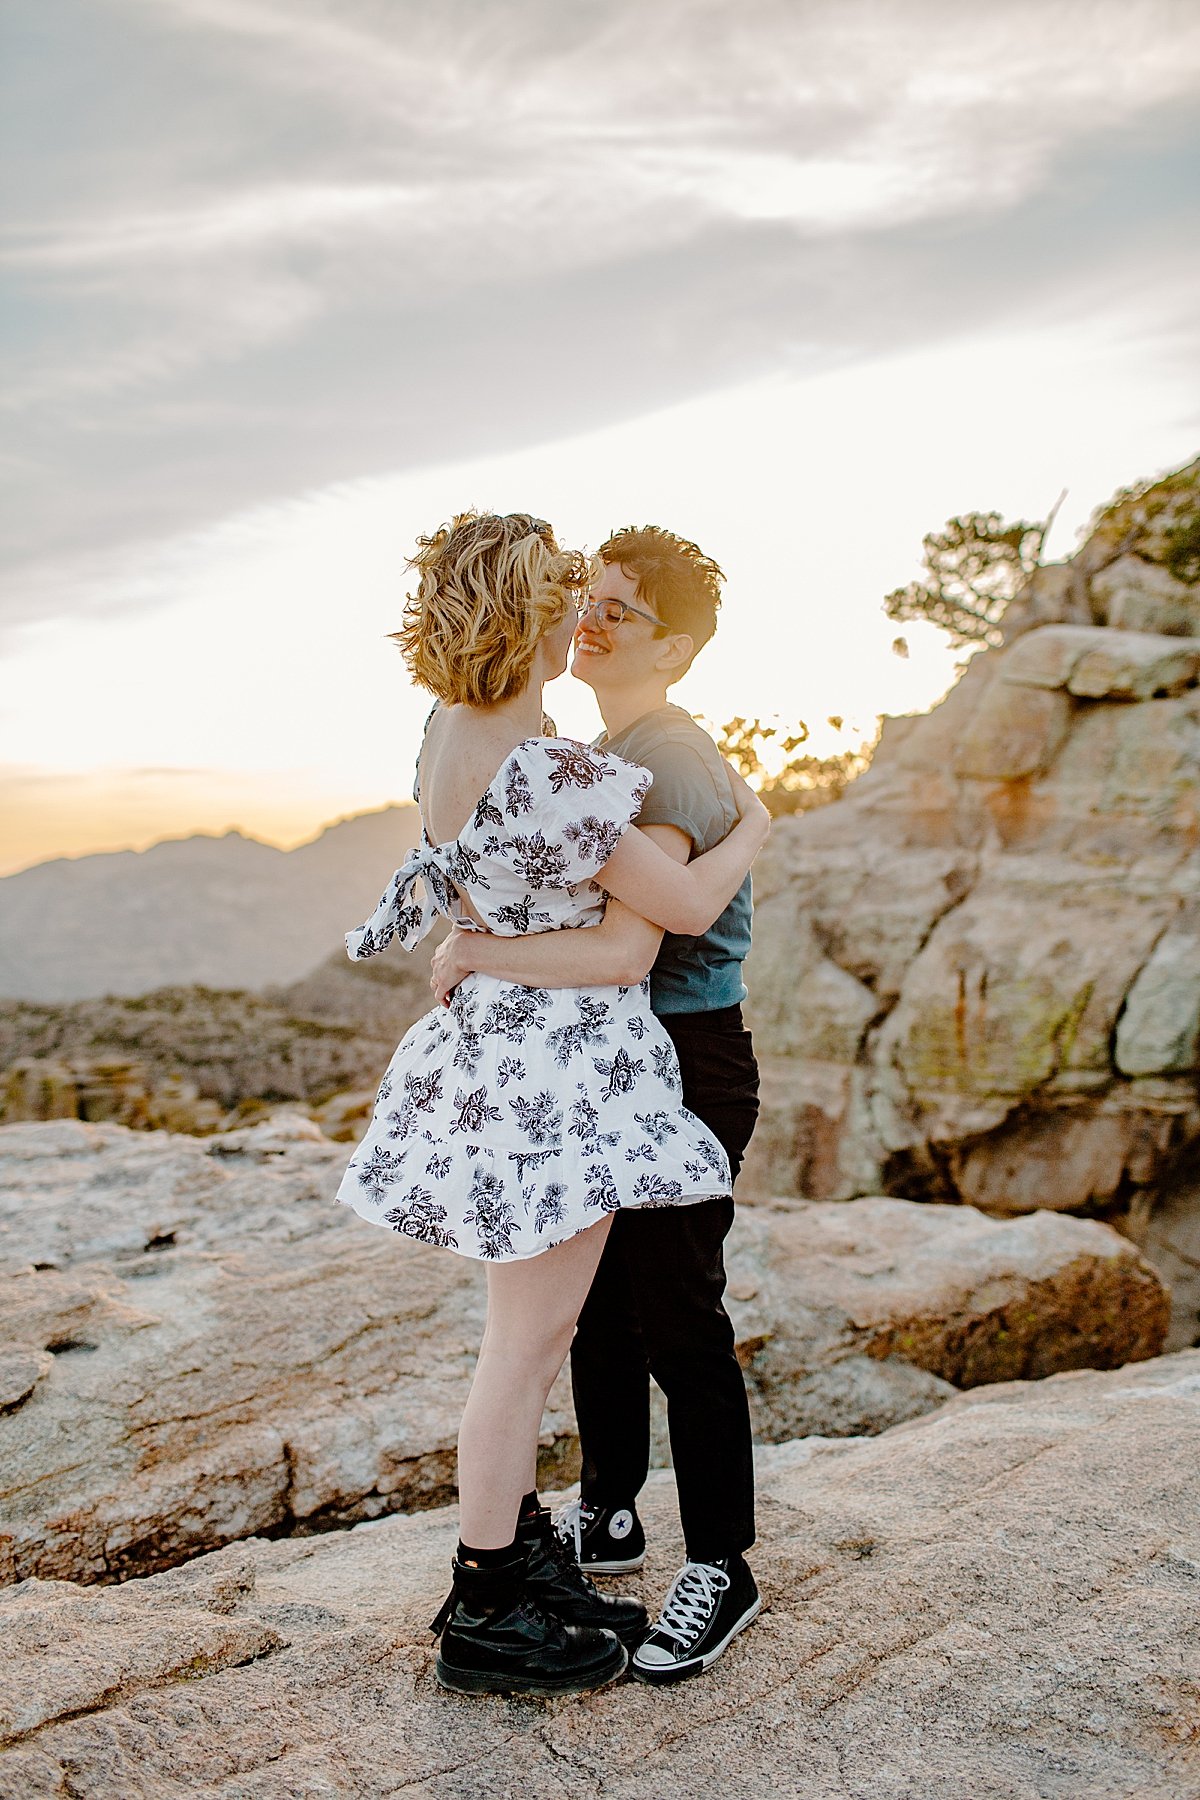  Girls kissing at sunset on the rocks wearing dress by Lucy Bouman photography 